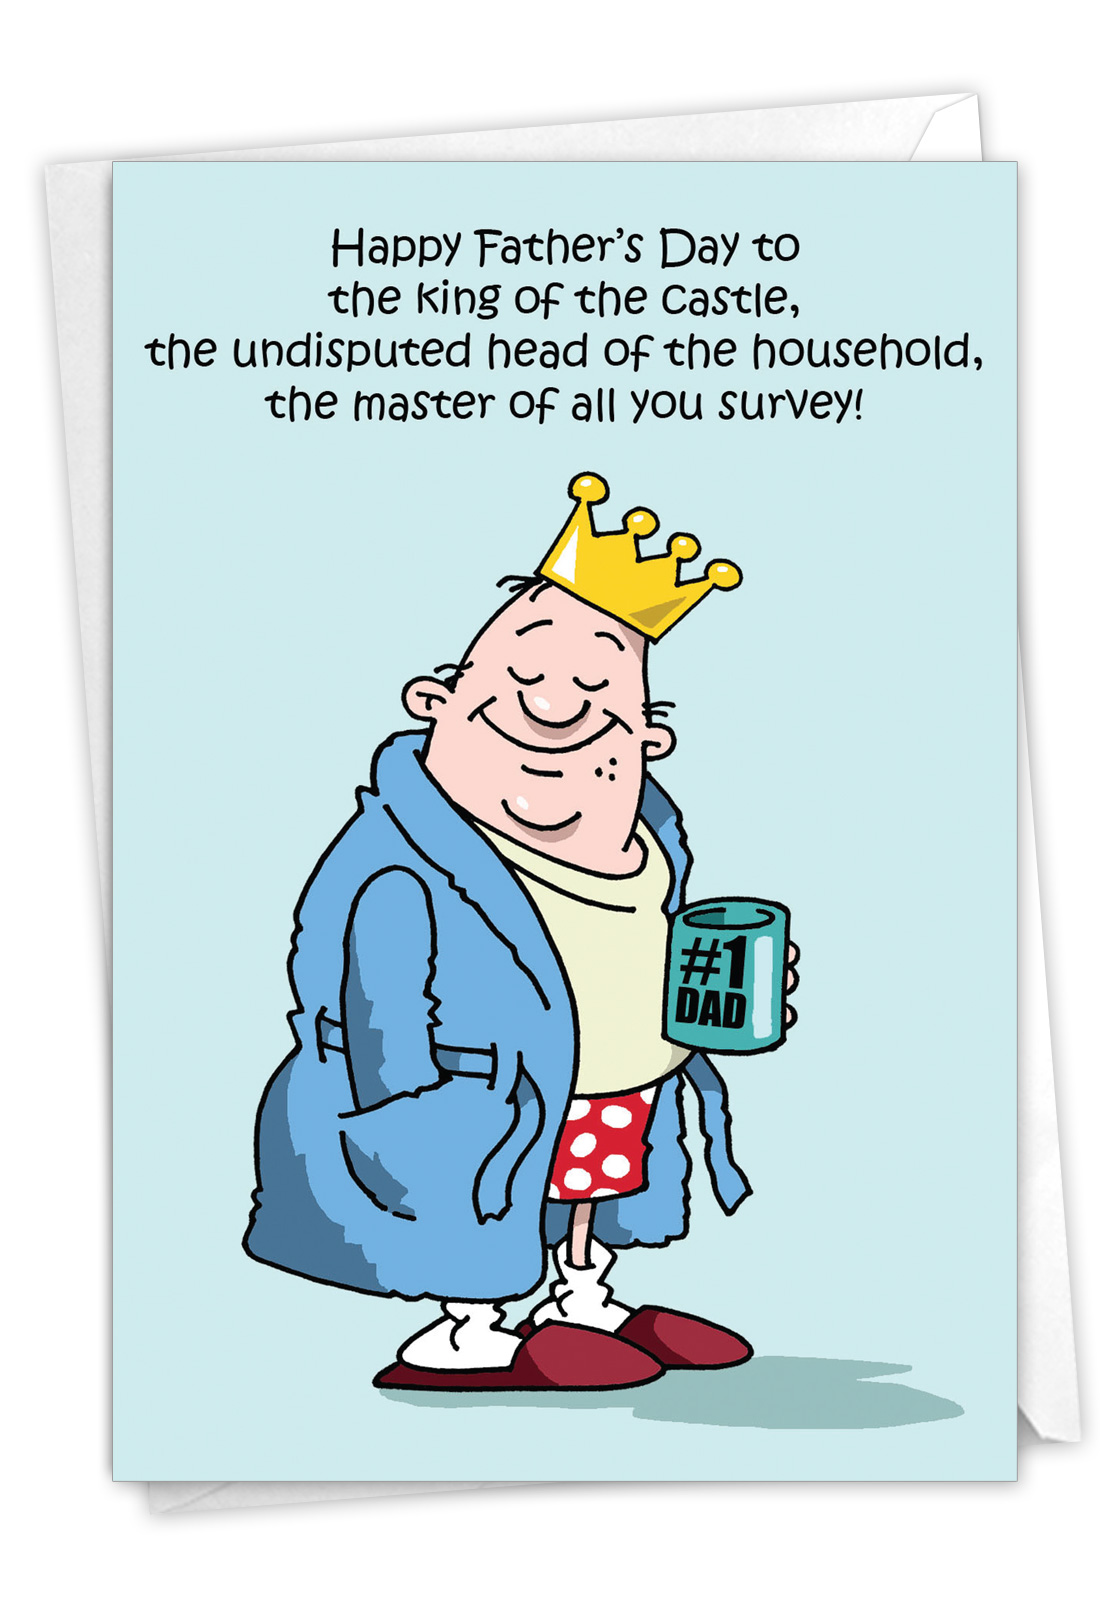 J0239 Jumbo Funny Fathers Day Card: King of the Castle With Matching Envelope | eBay1097 x 1600